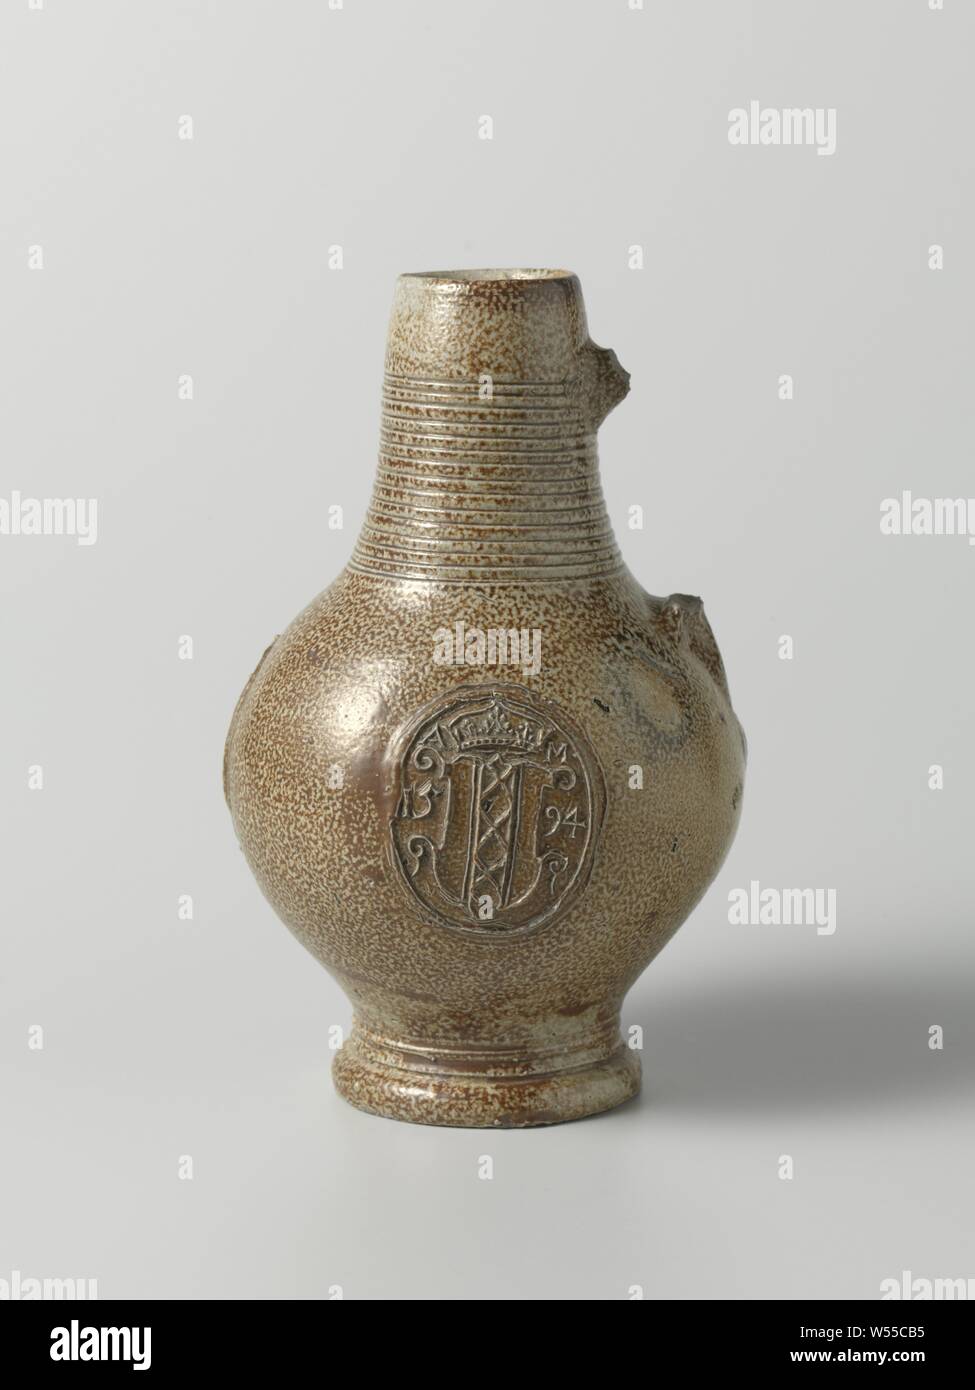 Jug with the coat of arms of Amsterdam, Jug of stoneware on high feet with a spherical body and a tapered neck. The C-shaped ear (missing) is attached to the neck and shoulder. A wide band with incised lines on the neck, profiles on the foot. Covered with a brown engobe. On the belly three times a printed and imposed medallion with the crowned weapon of Amsterdam in relief. On the weapon the inscription 'AM' and the date '1594'. Raeren., anonymous, Raeren, c. 1594 - c. 1610, stoneware, glaze, engobe, vitrification, h 18.8 cm d 4.3 cm d 11.7 cm d 7.2 cm Stock Photo